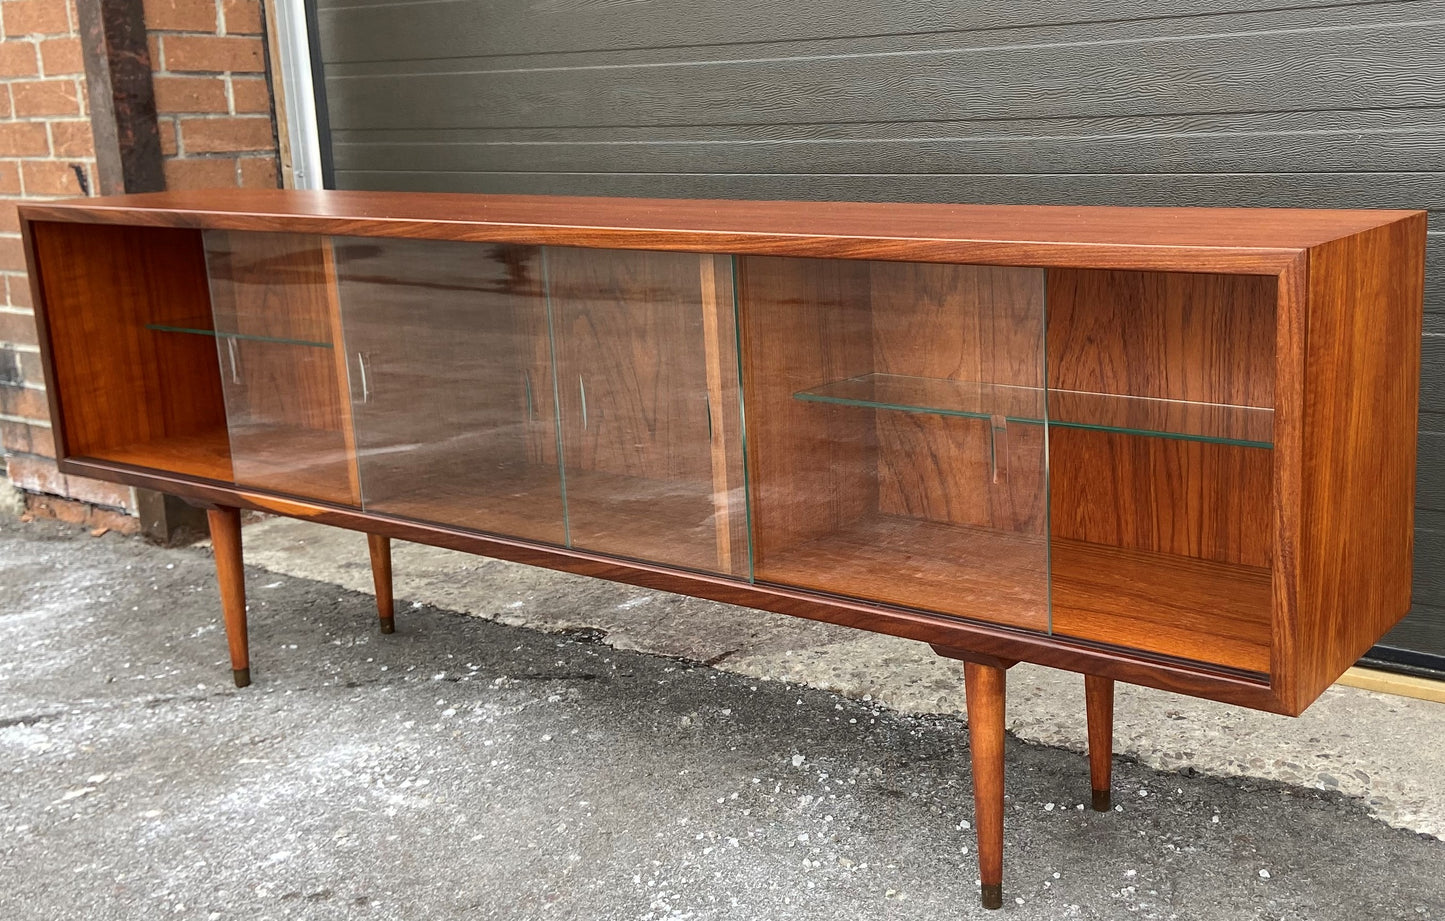 REFINISHED Mid Century Modern Teak Bookcase Display 72" Perfect